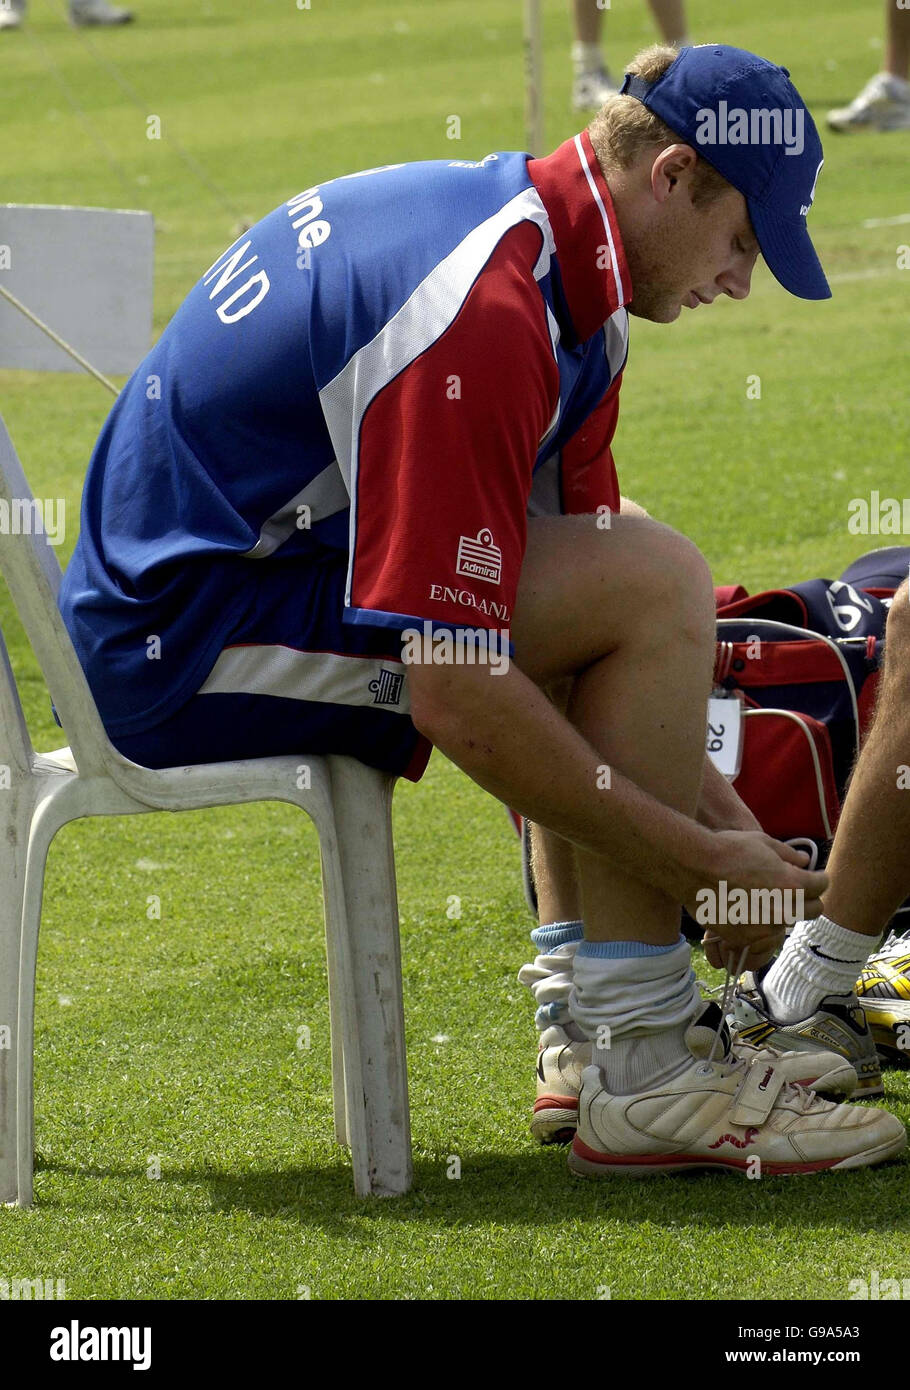 England captain Andrew Flintoff sits out of a net session at the Keenan Stadium, Jamshedpur, India. Stock Photo